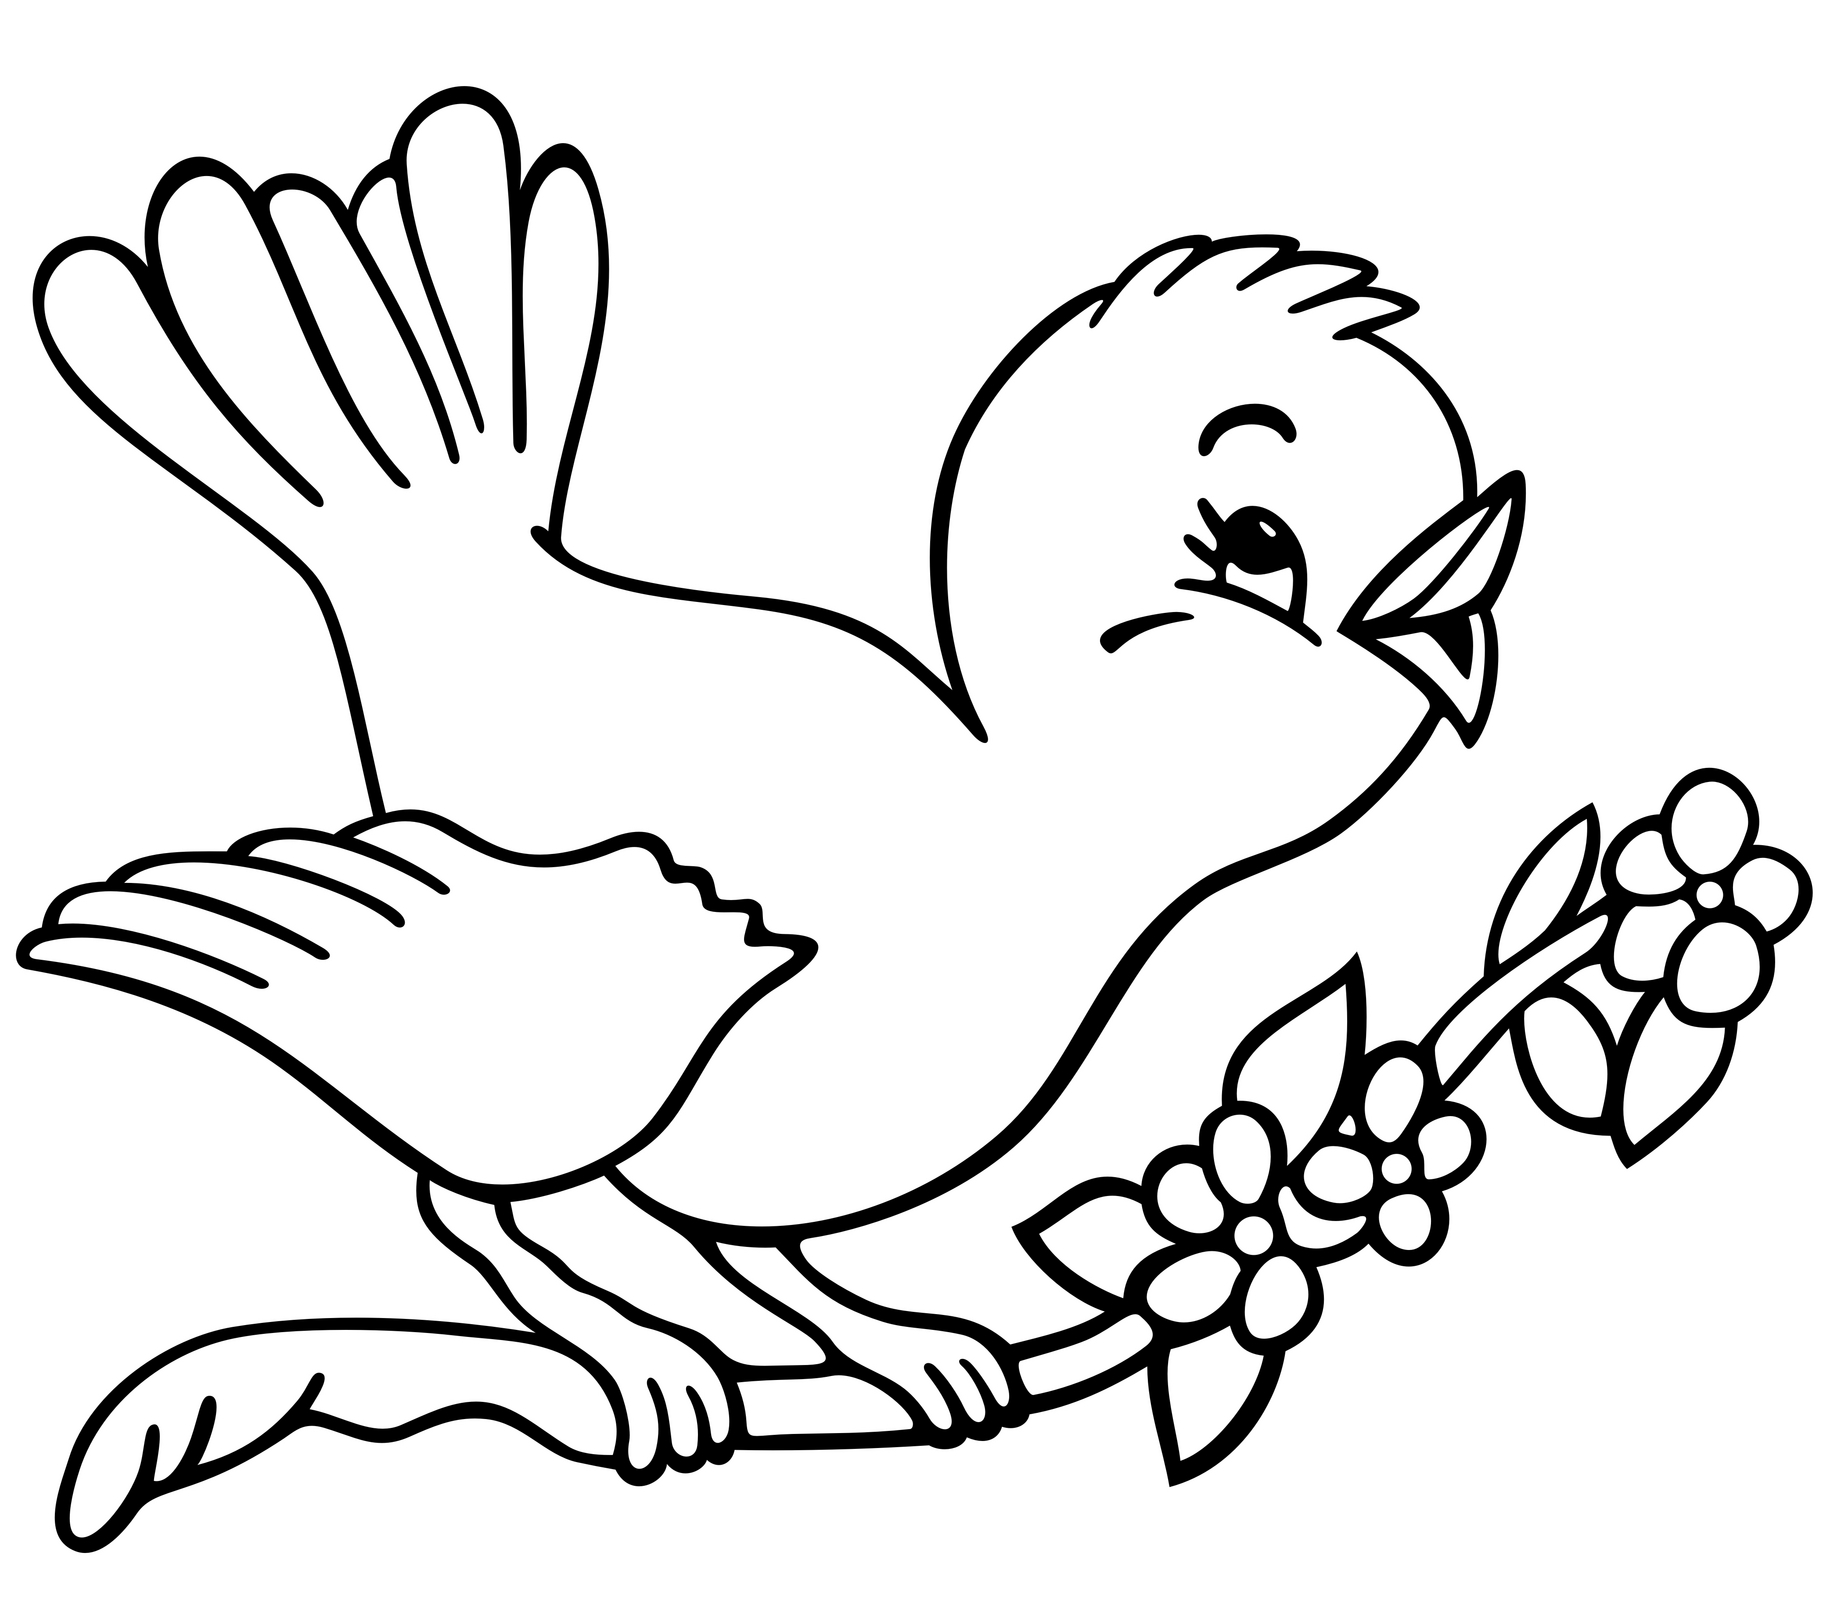  Printable Coloring Pages for Kids